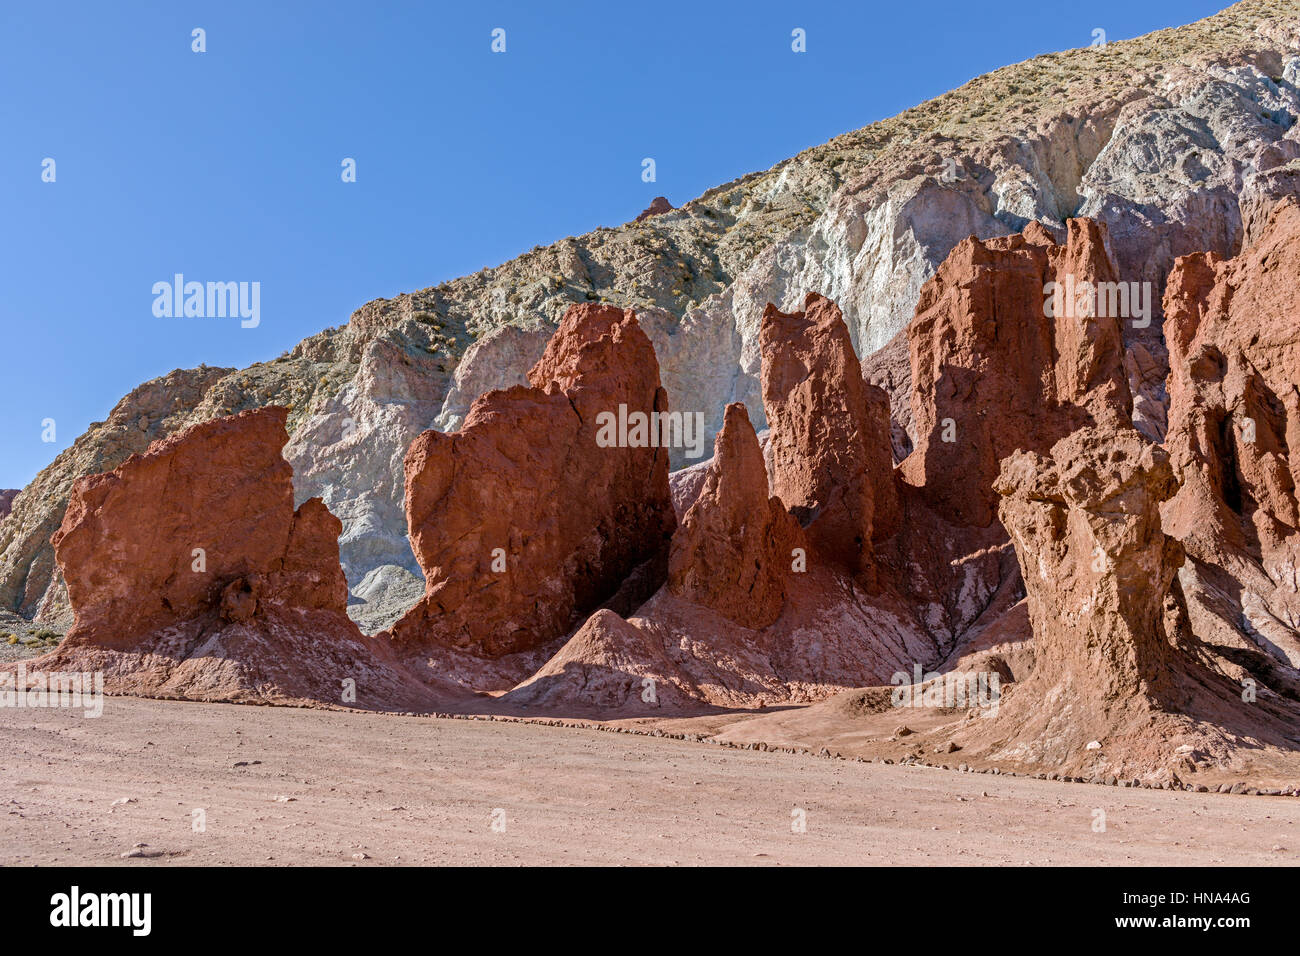 Colourful rocks in the Valle del Arcoiris - Rainbow Valley Stock Photo